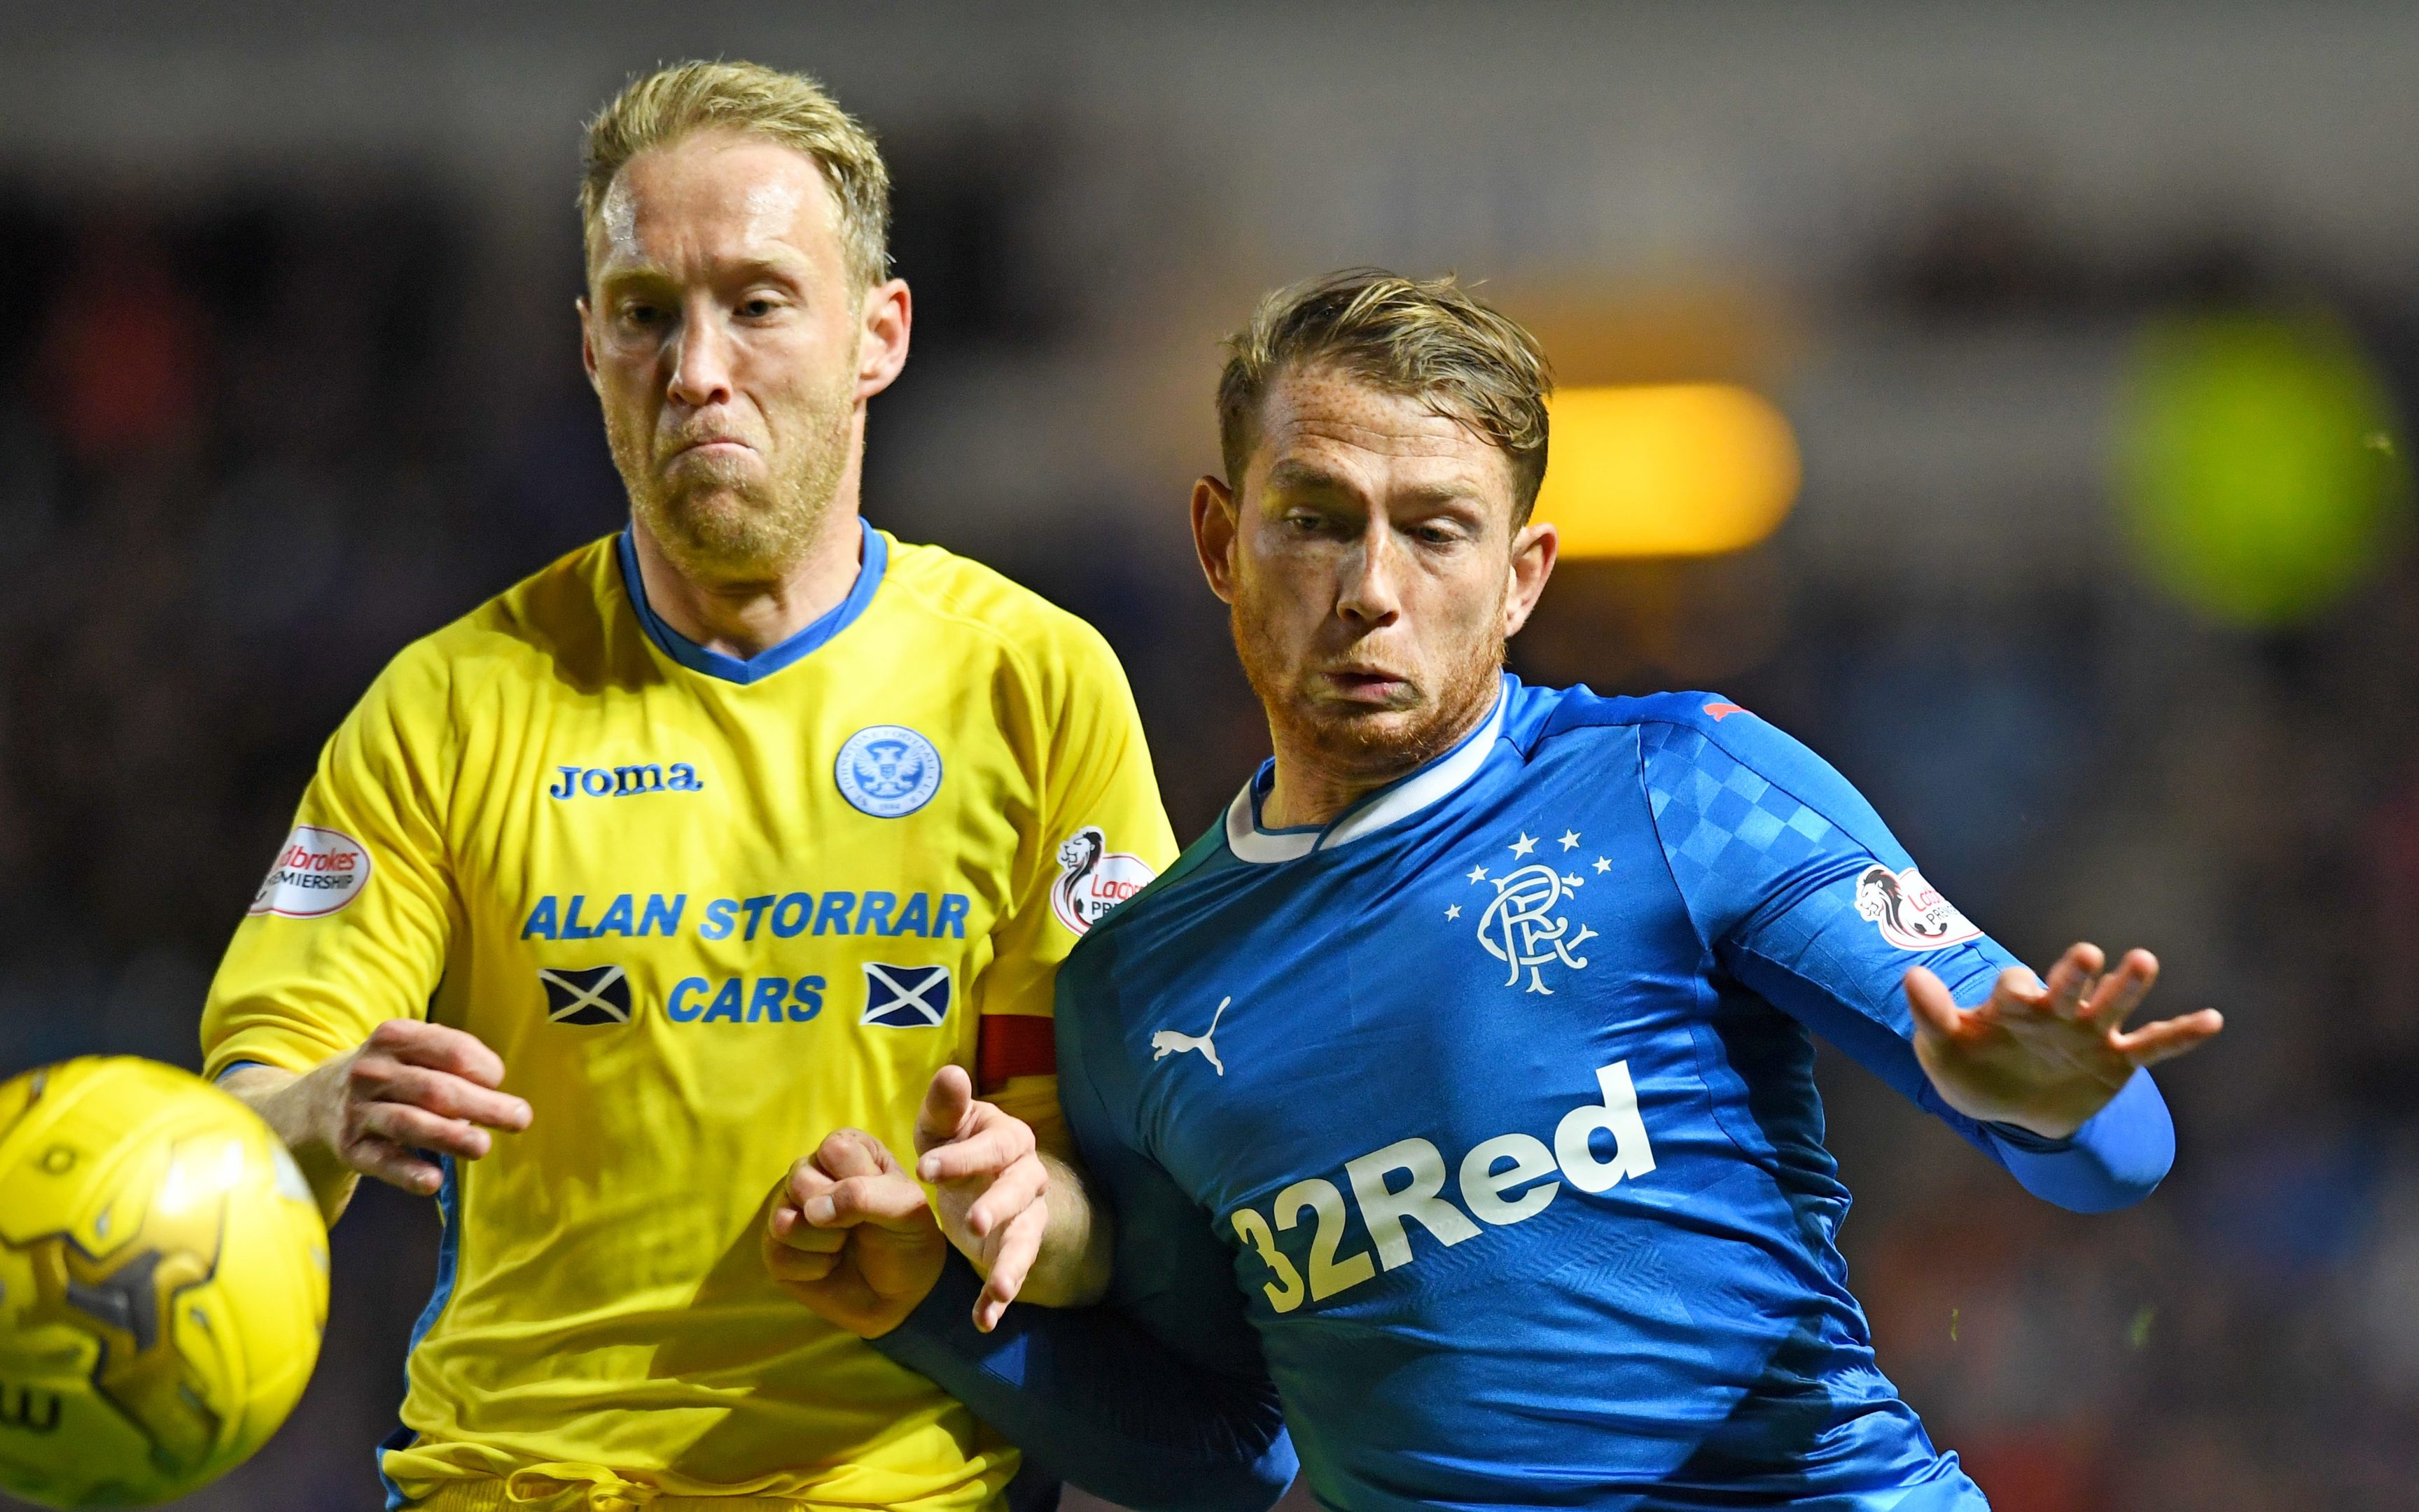 Steven Anderson in action against Rangers.